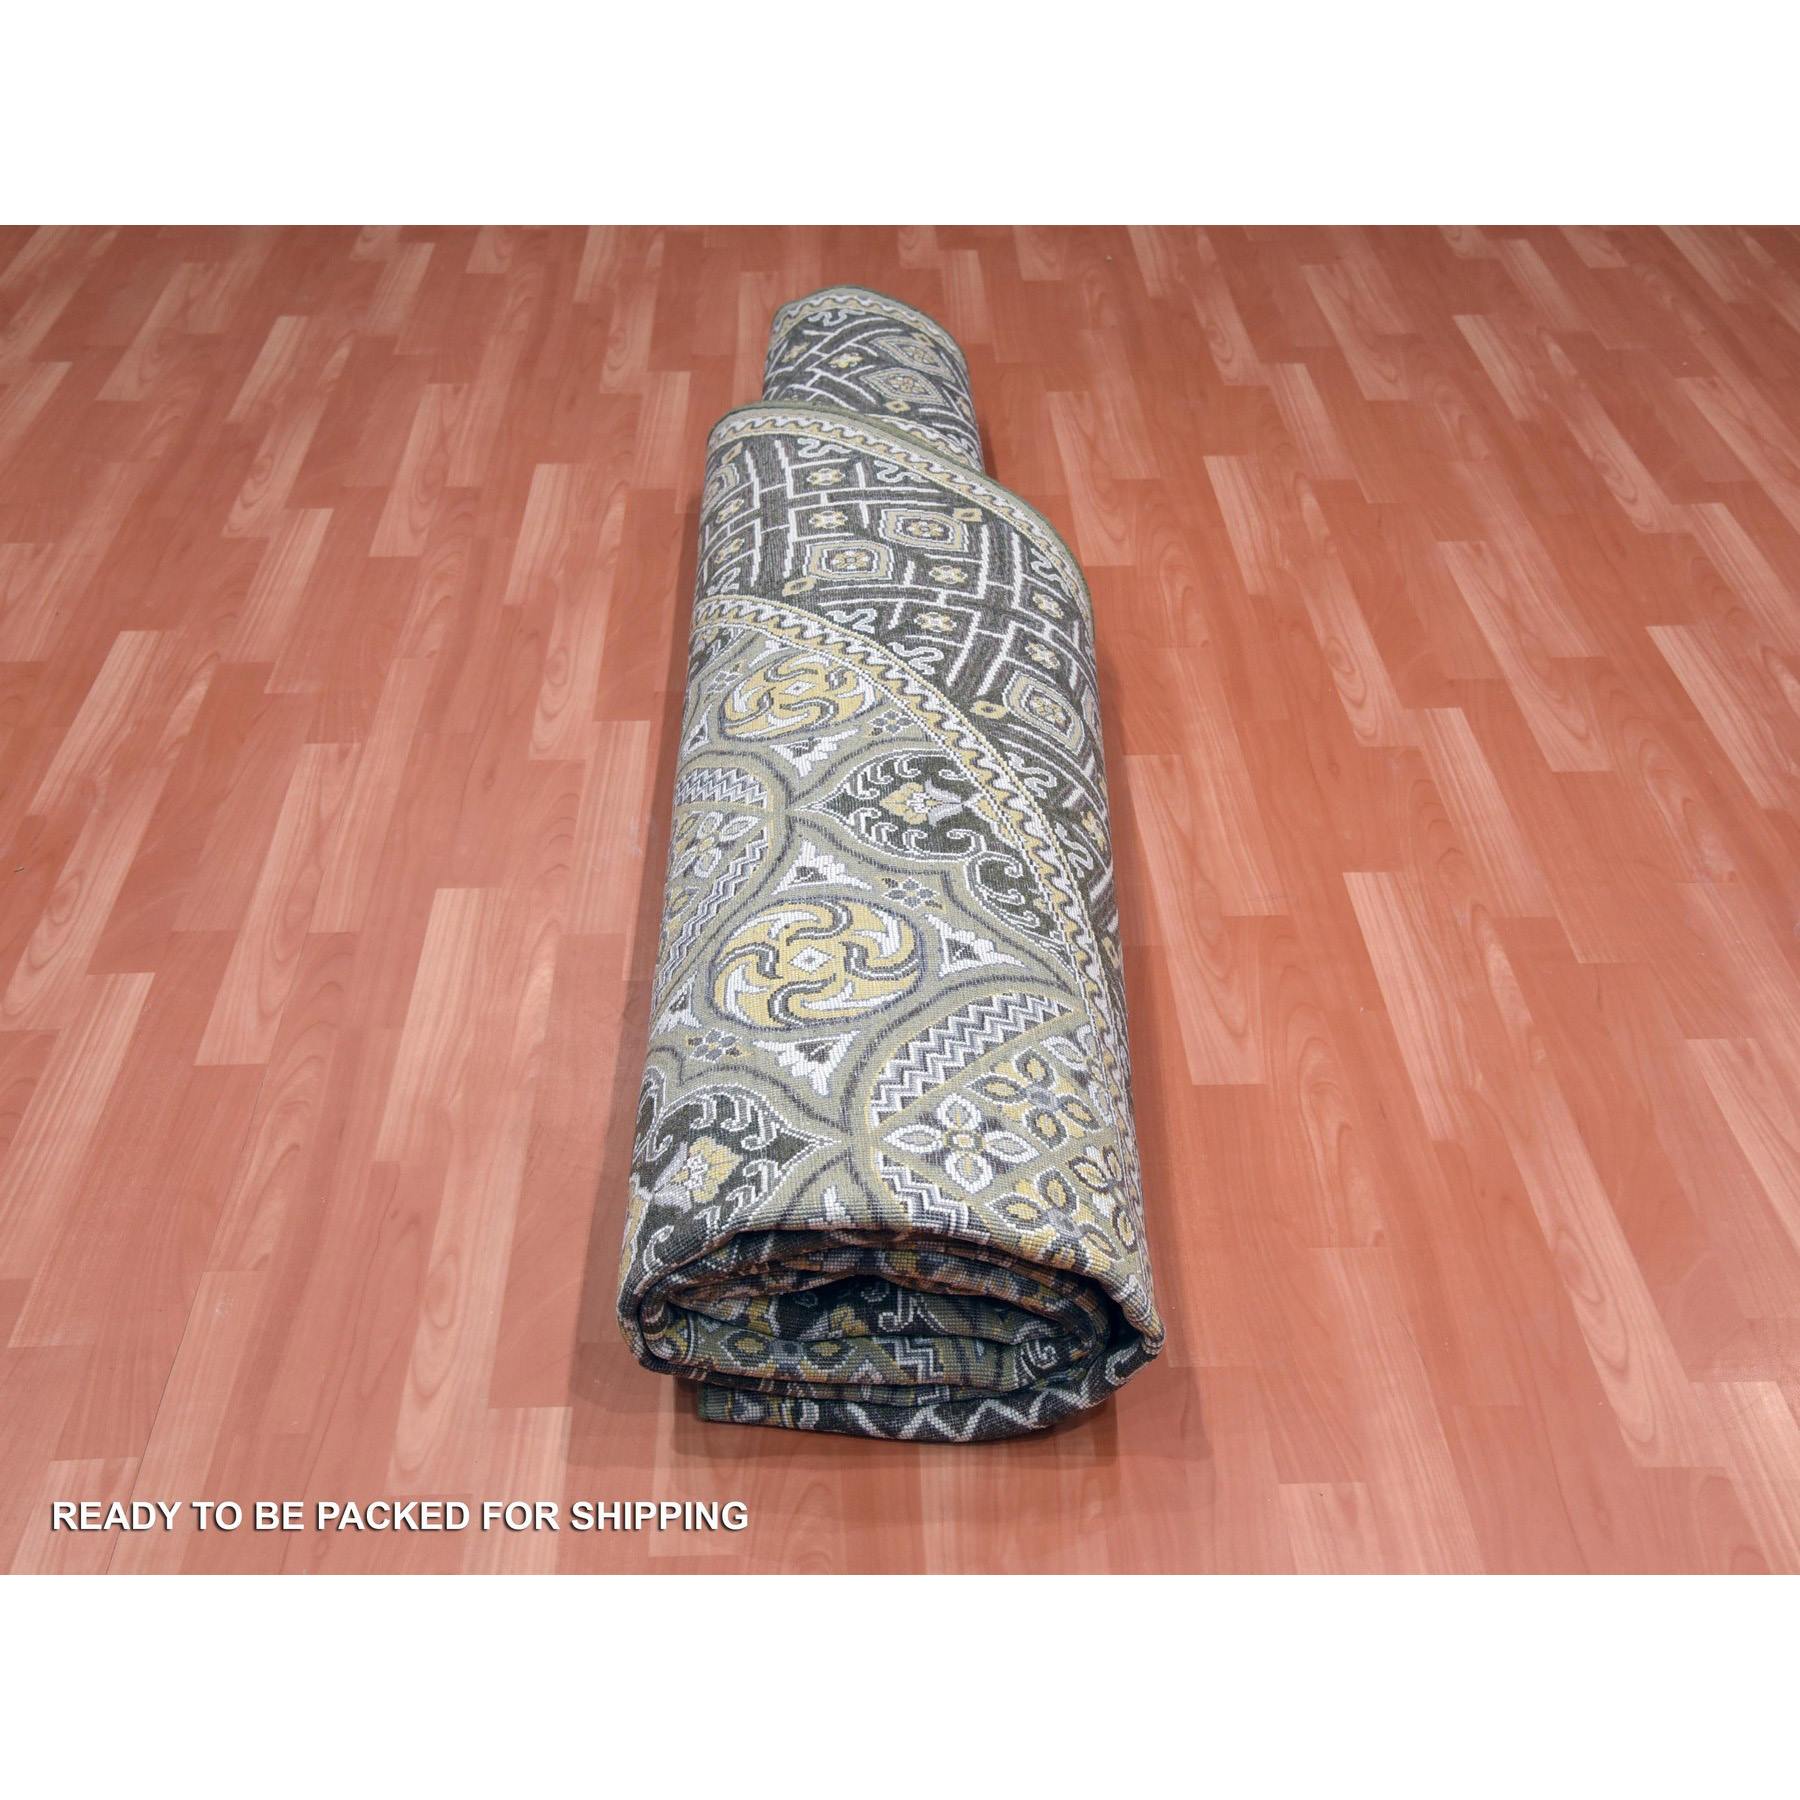 Transitional-Hand-Knotted-Rug-375690